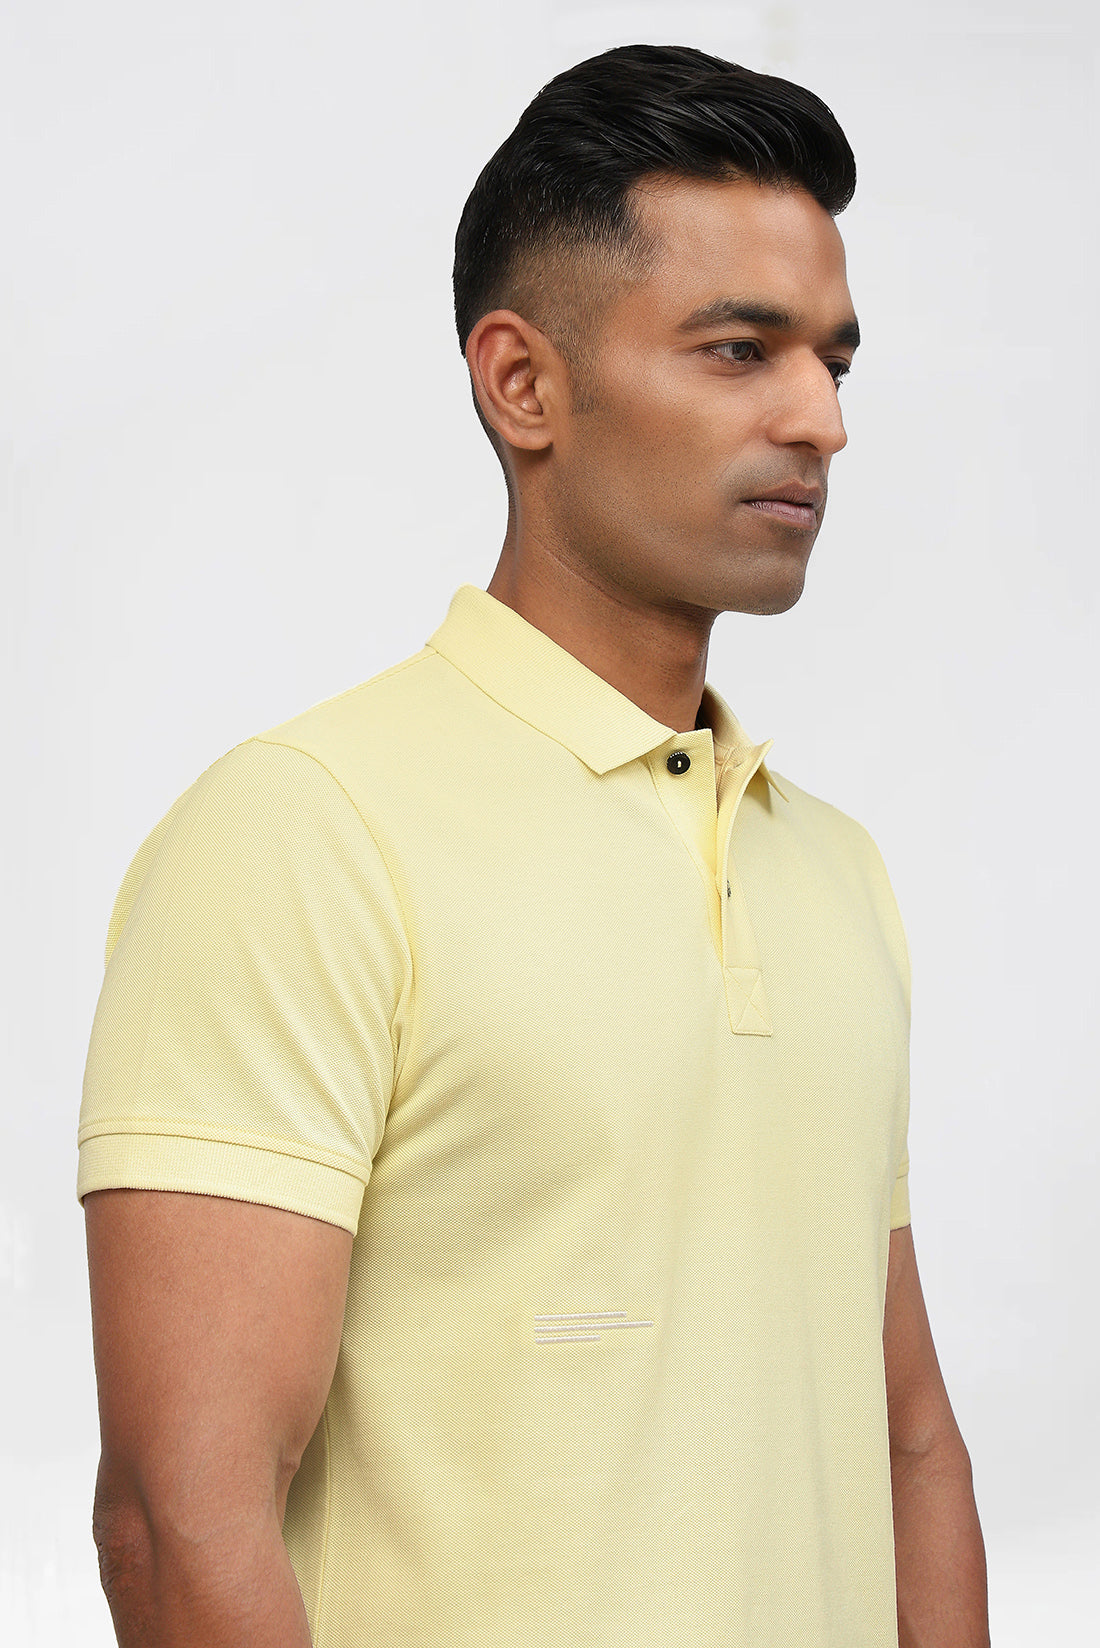 Classic Men's Polo T-Shirt With Floral Genes Monogram